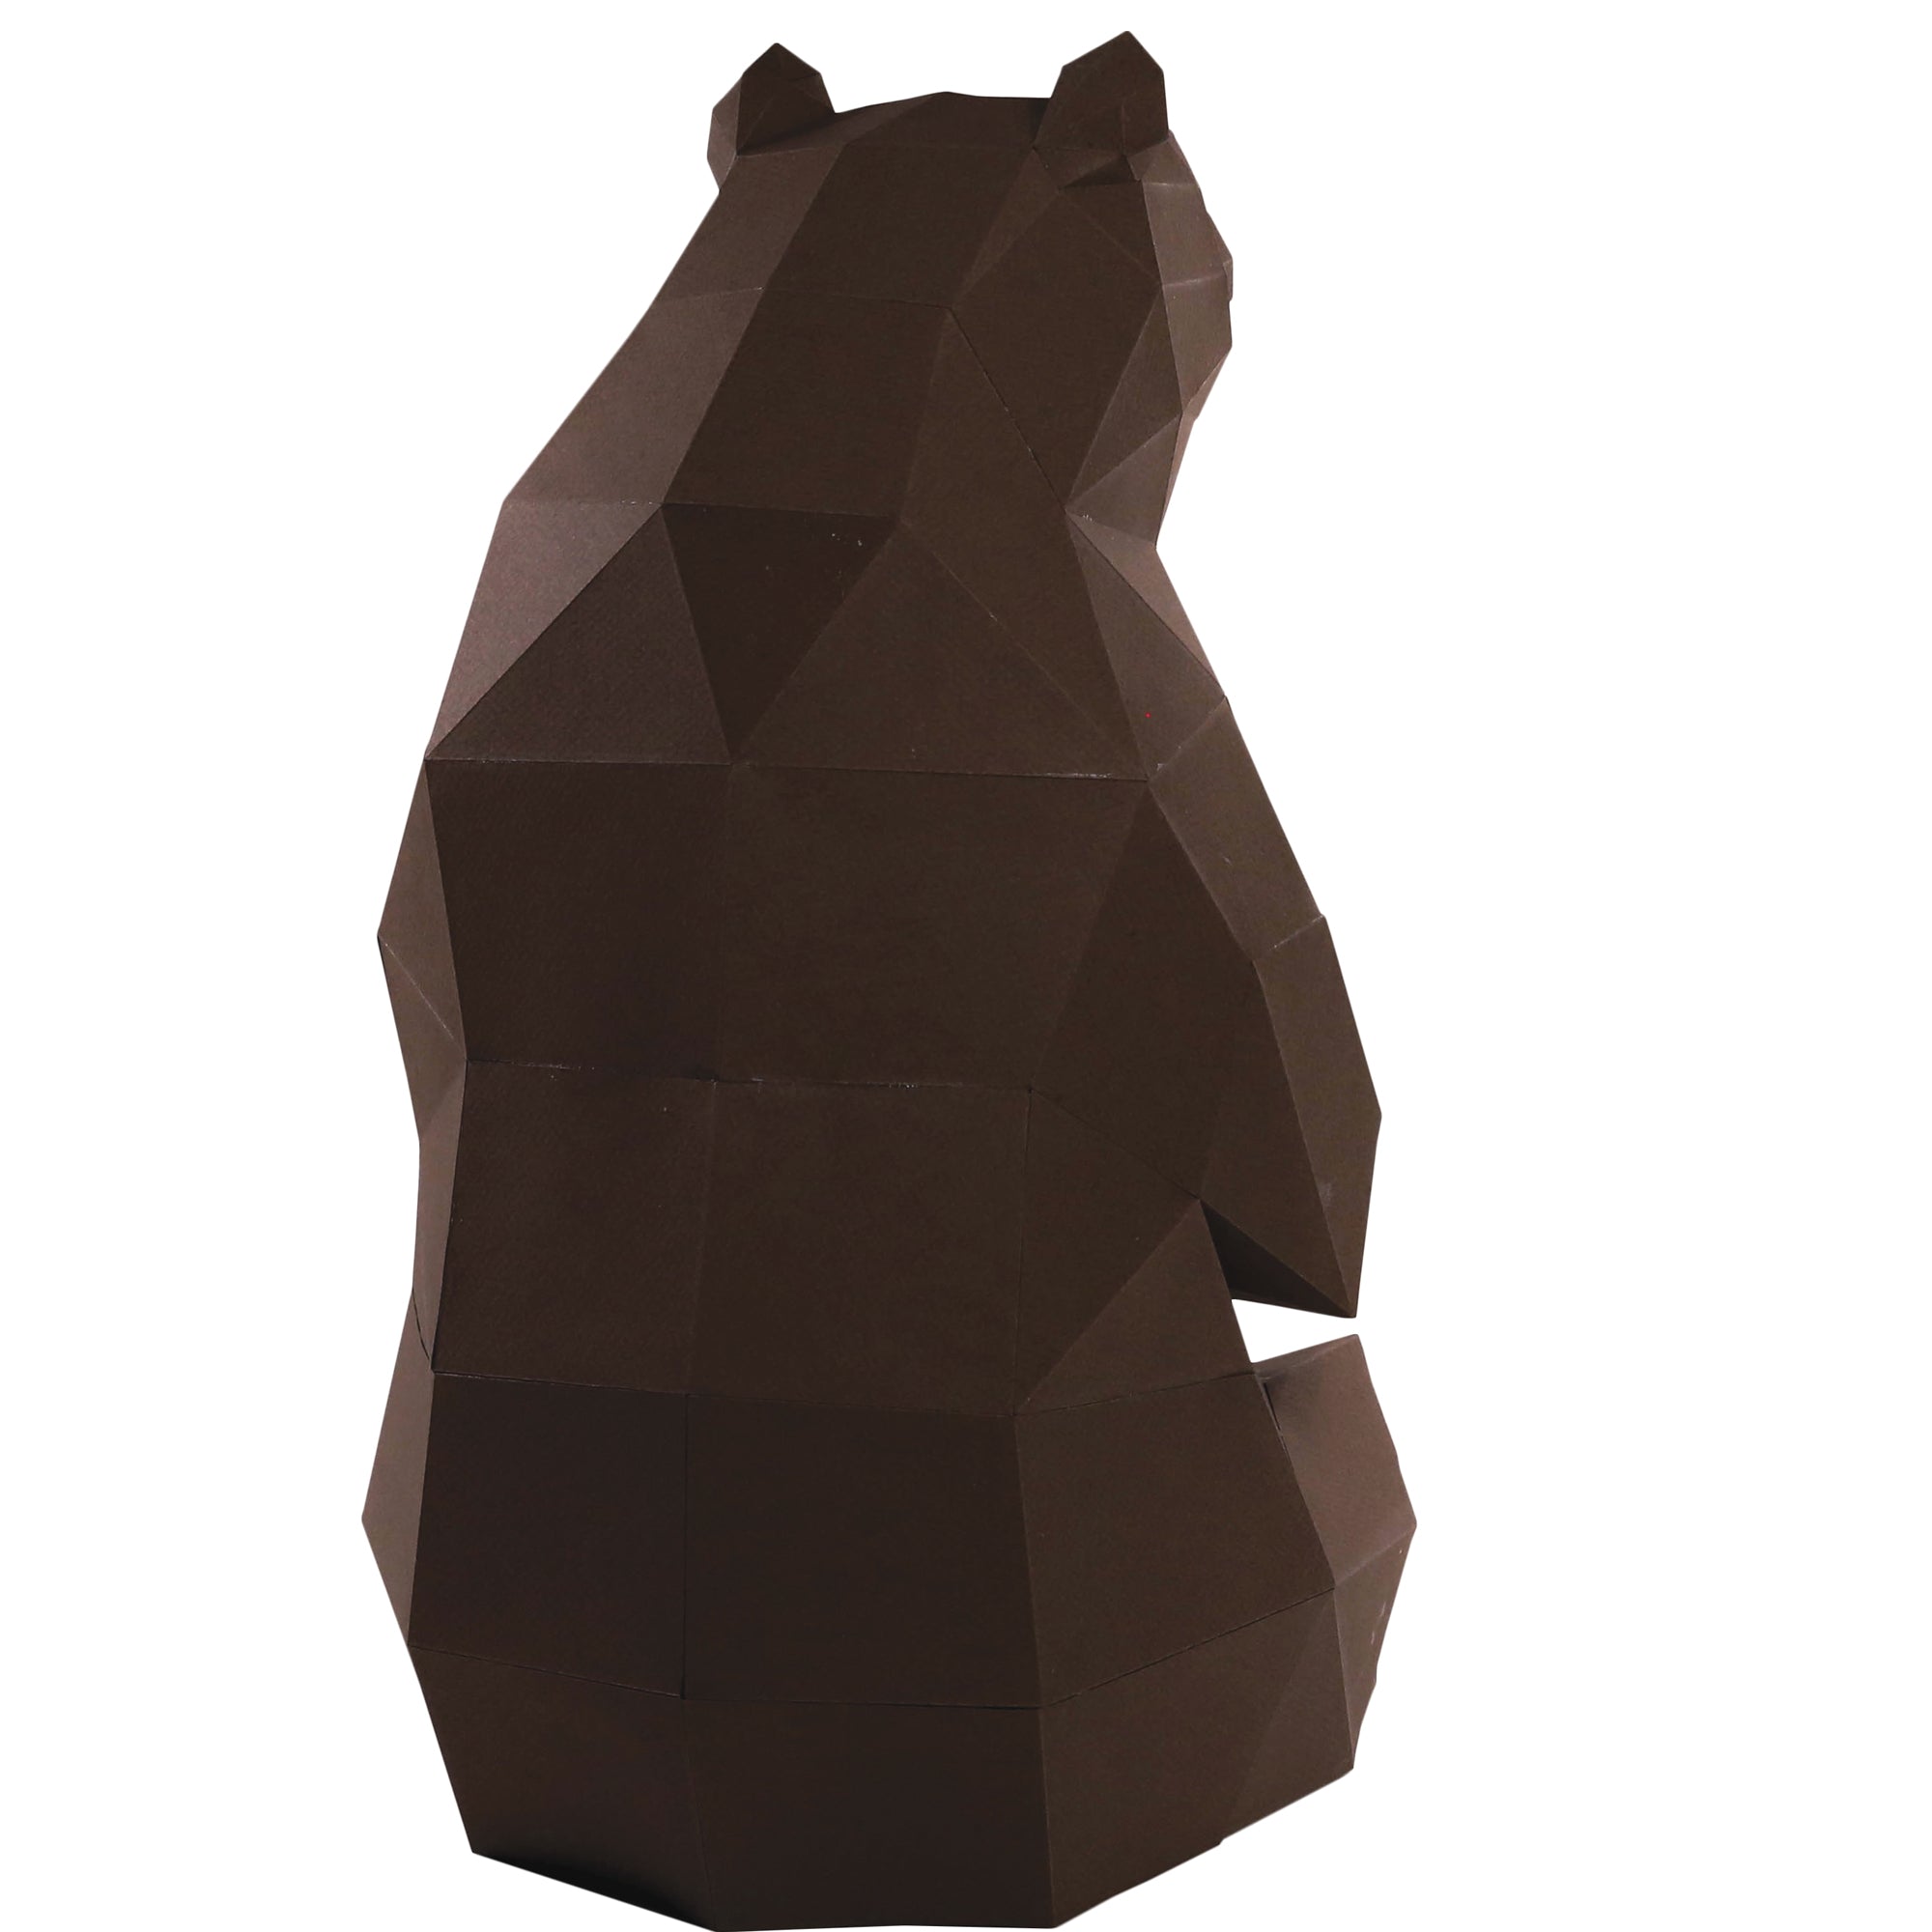 Back view of a dark brown Geometrical-shaped Papercraft bear that is folded and cut paper pieces glued together with a white background.